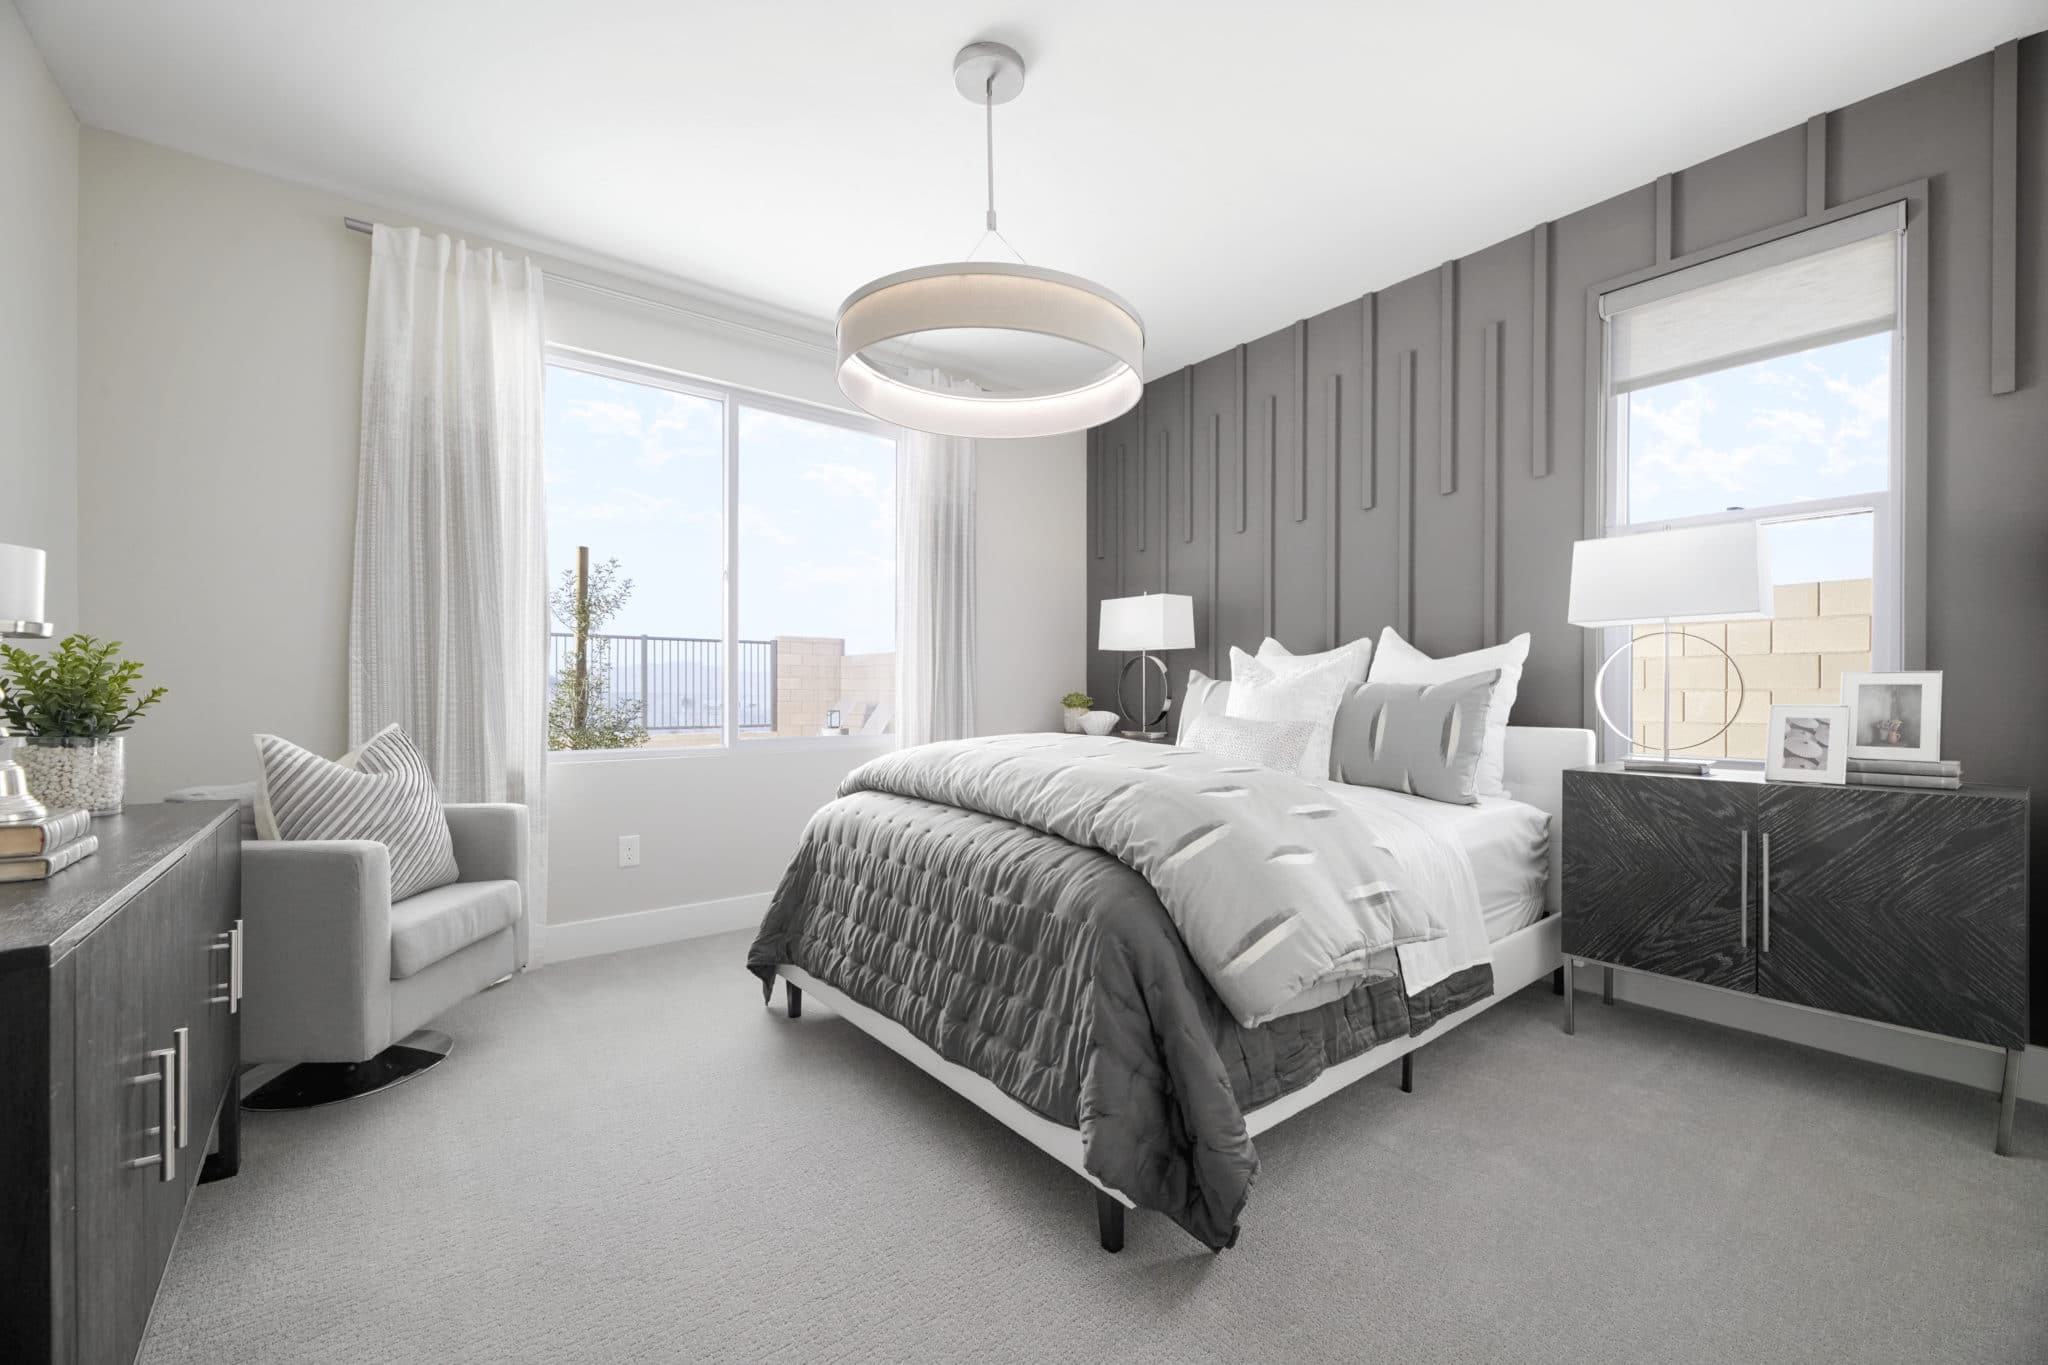 Bedroom of Plan 4 at Kings Canyon by Tri Pointe Homes